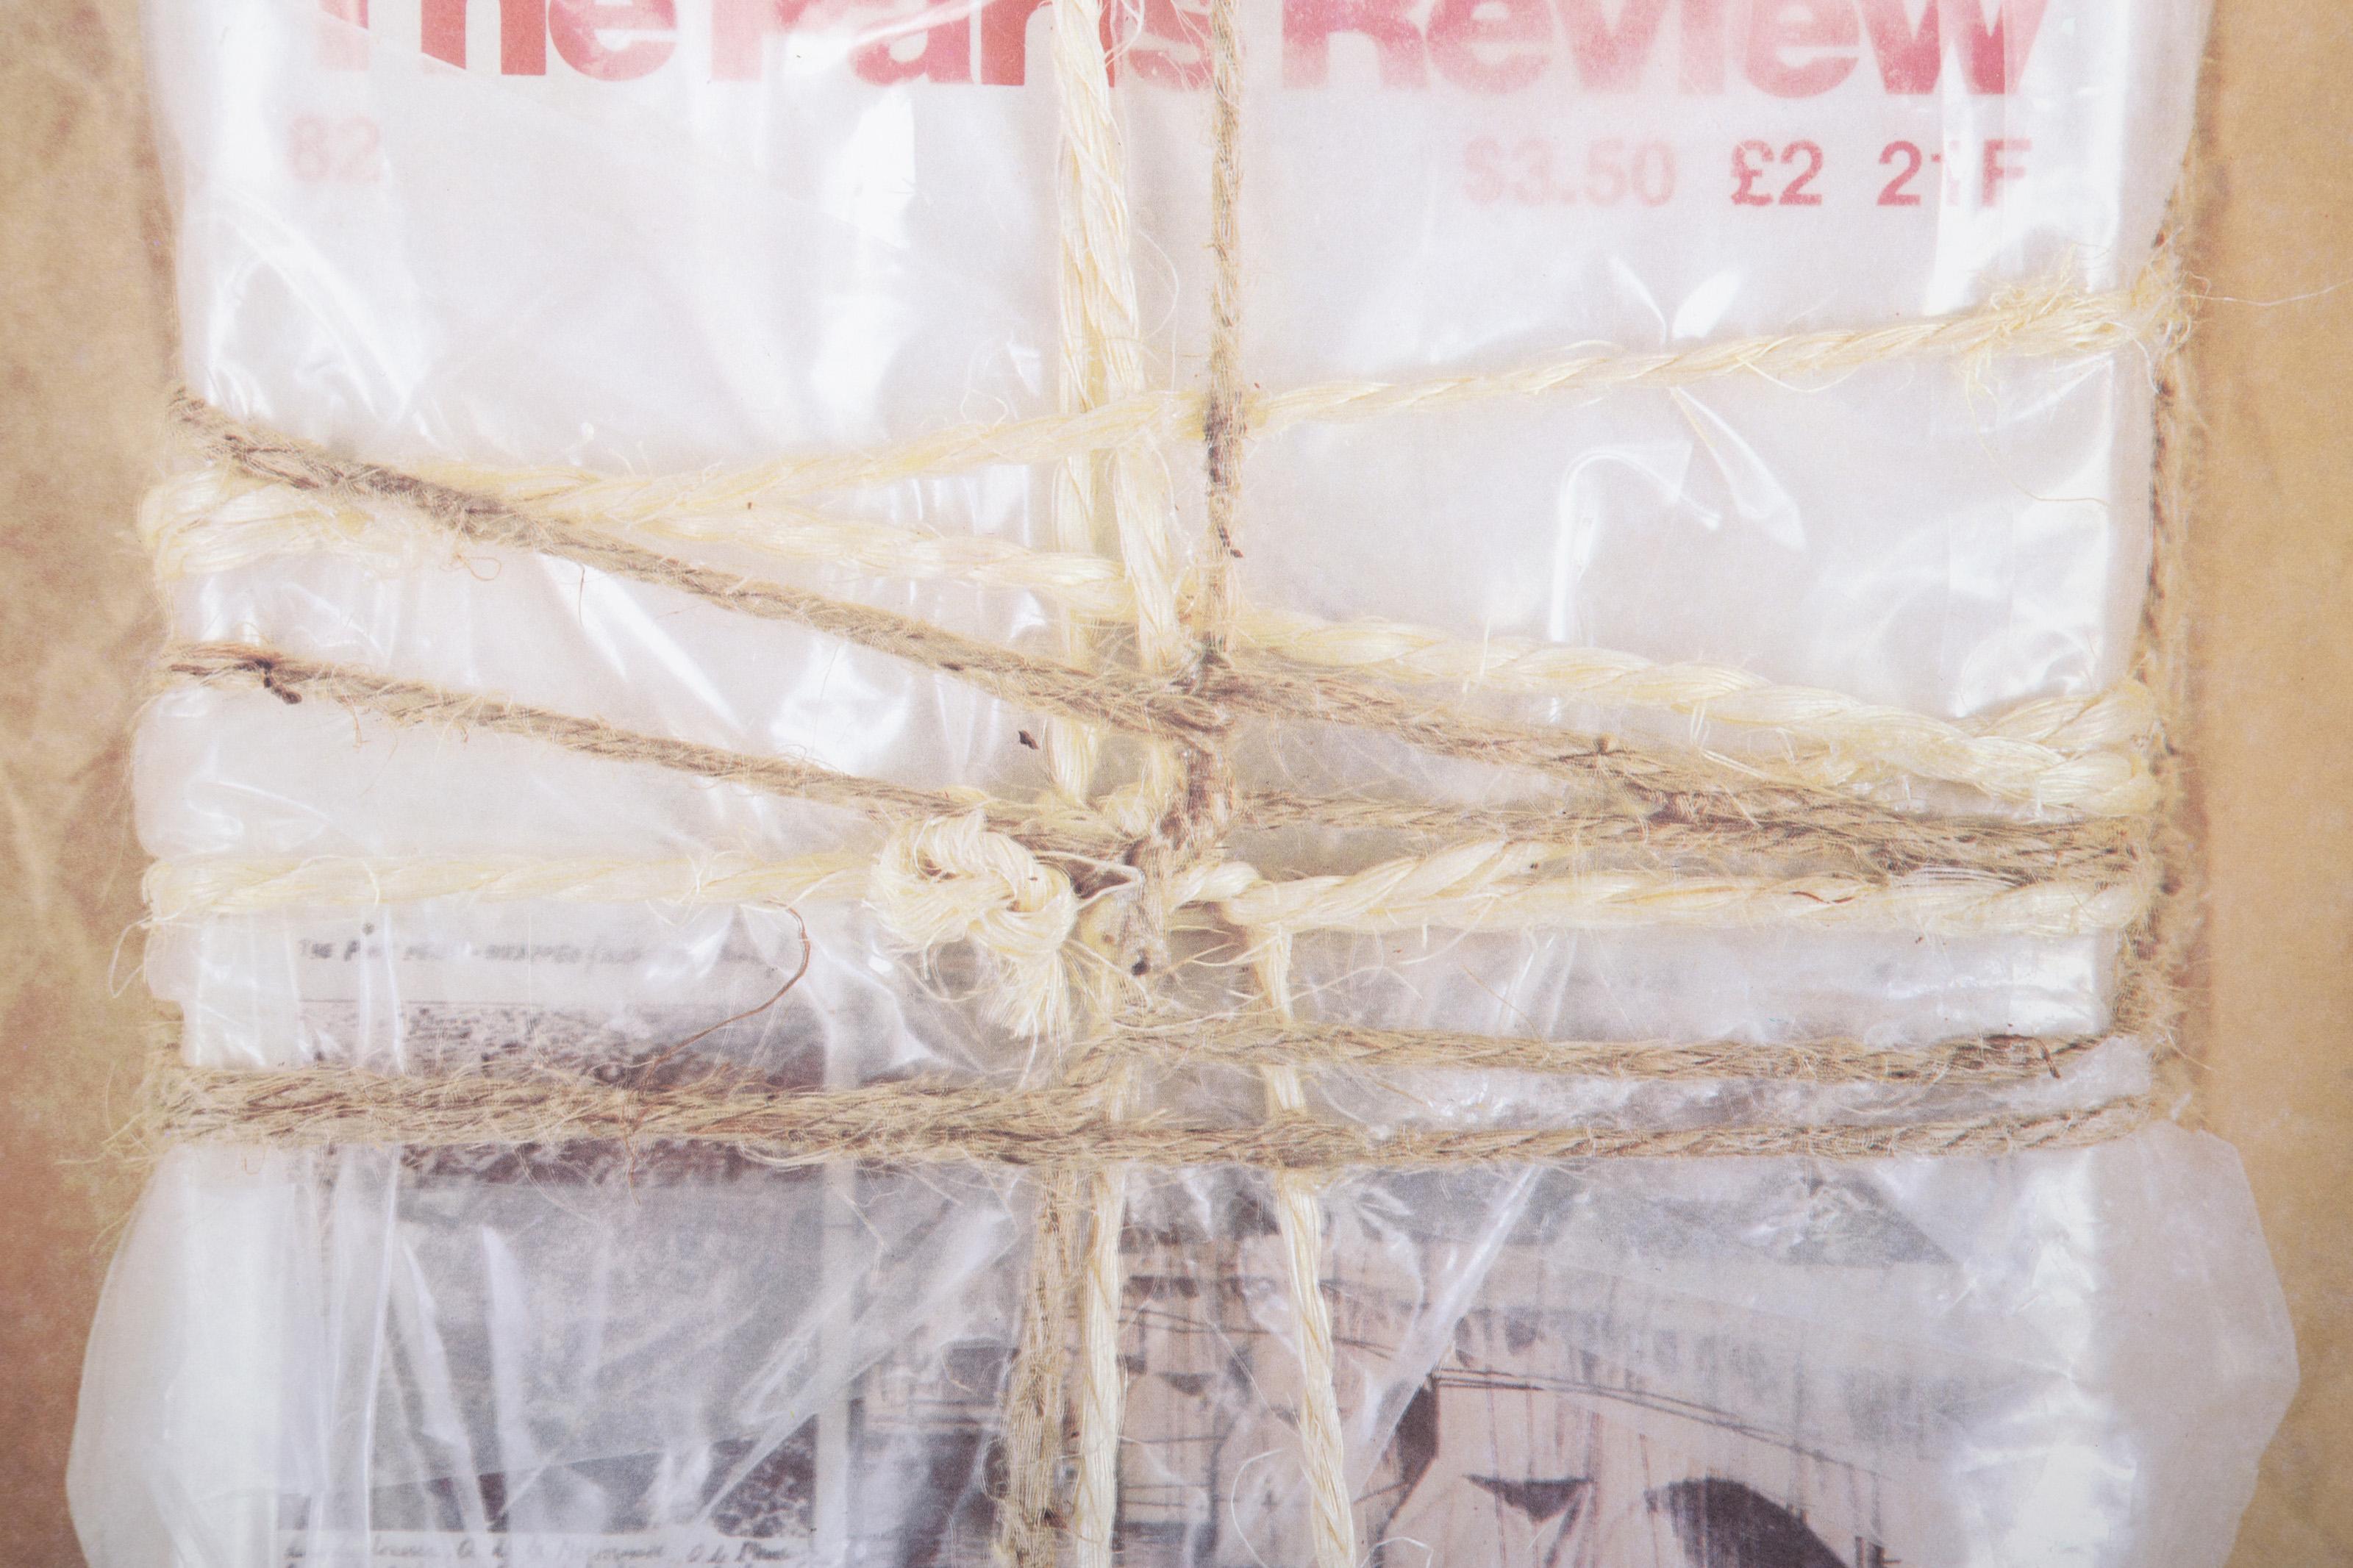 Wrapped Paris Review, Offset Lithograph by Christo and Jeanne-Claude For Sale 1